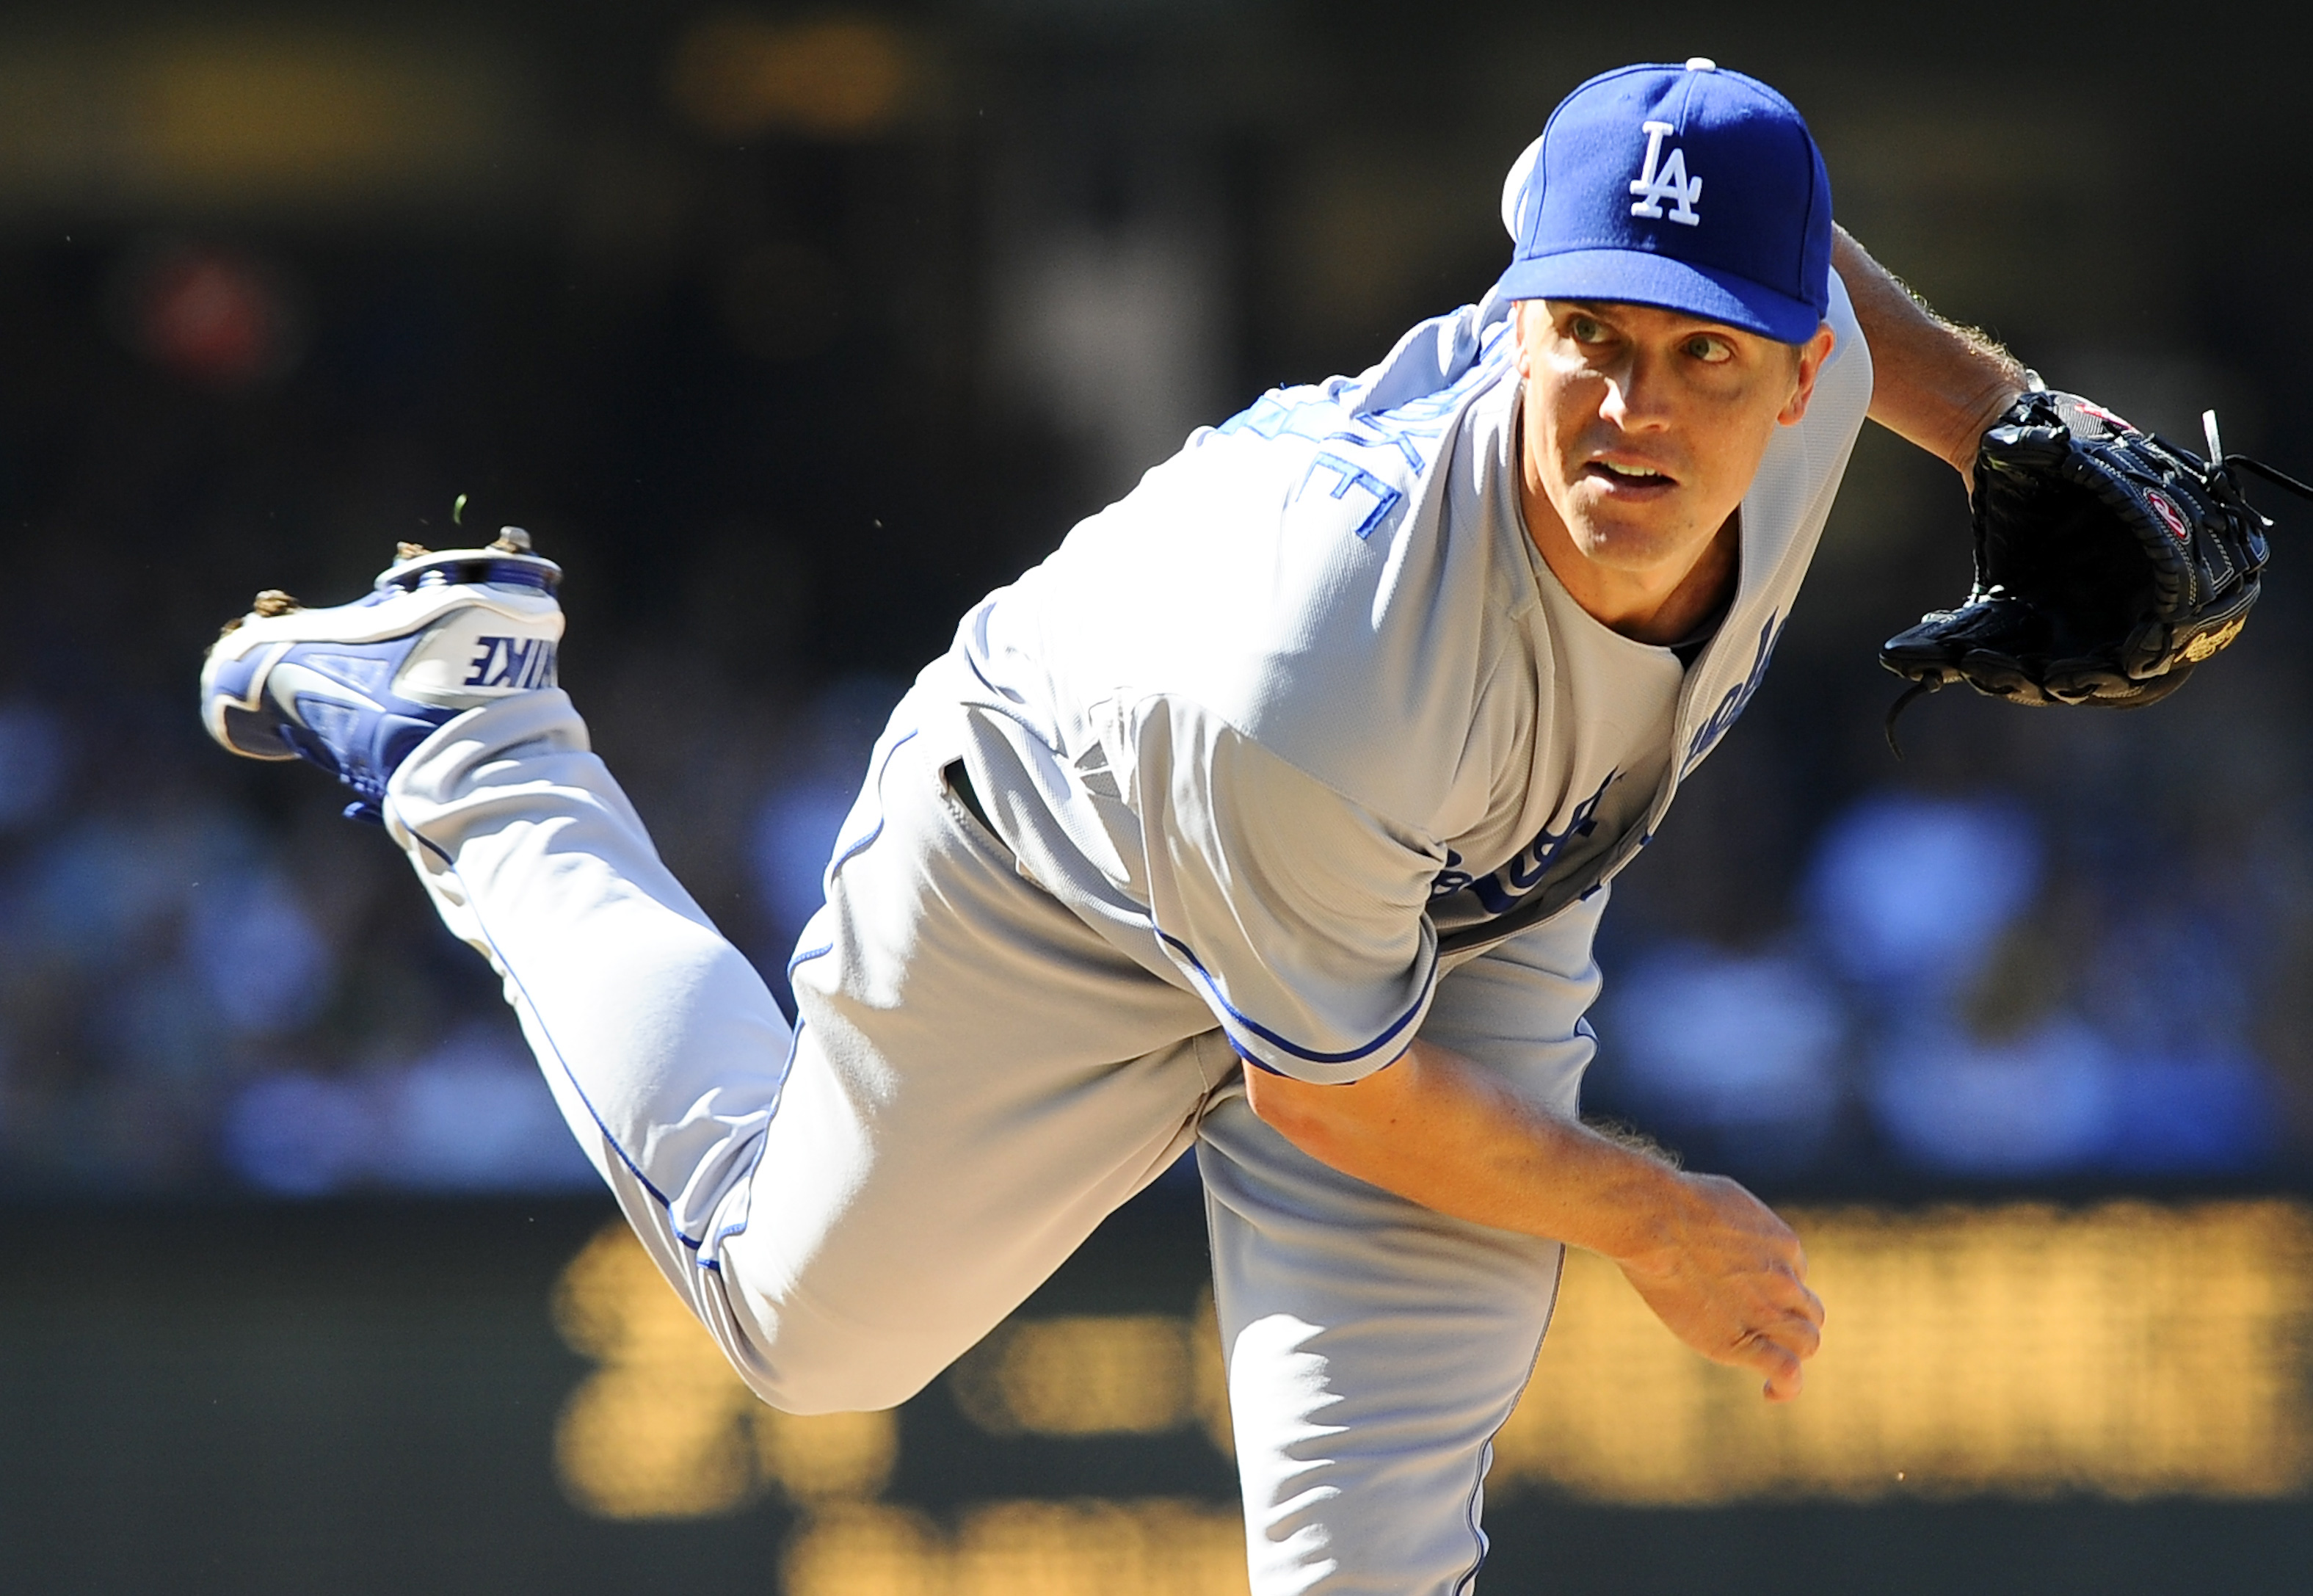 June 22, 2013; San Diego, CA, USA; Los Angeles Dodgers starting pitcher Zack Greinke (21) throws during the first inning against the San Diego Padres at Petco Park. Mandatory Credit: Christopher Hanewinckel-USA TODAY Sports